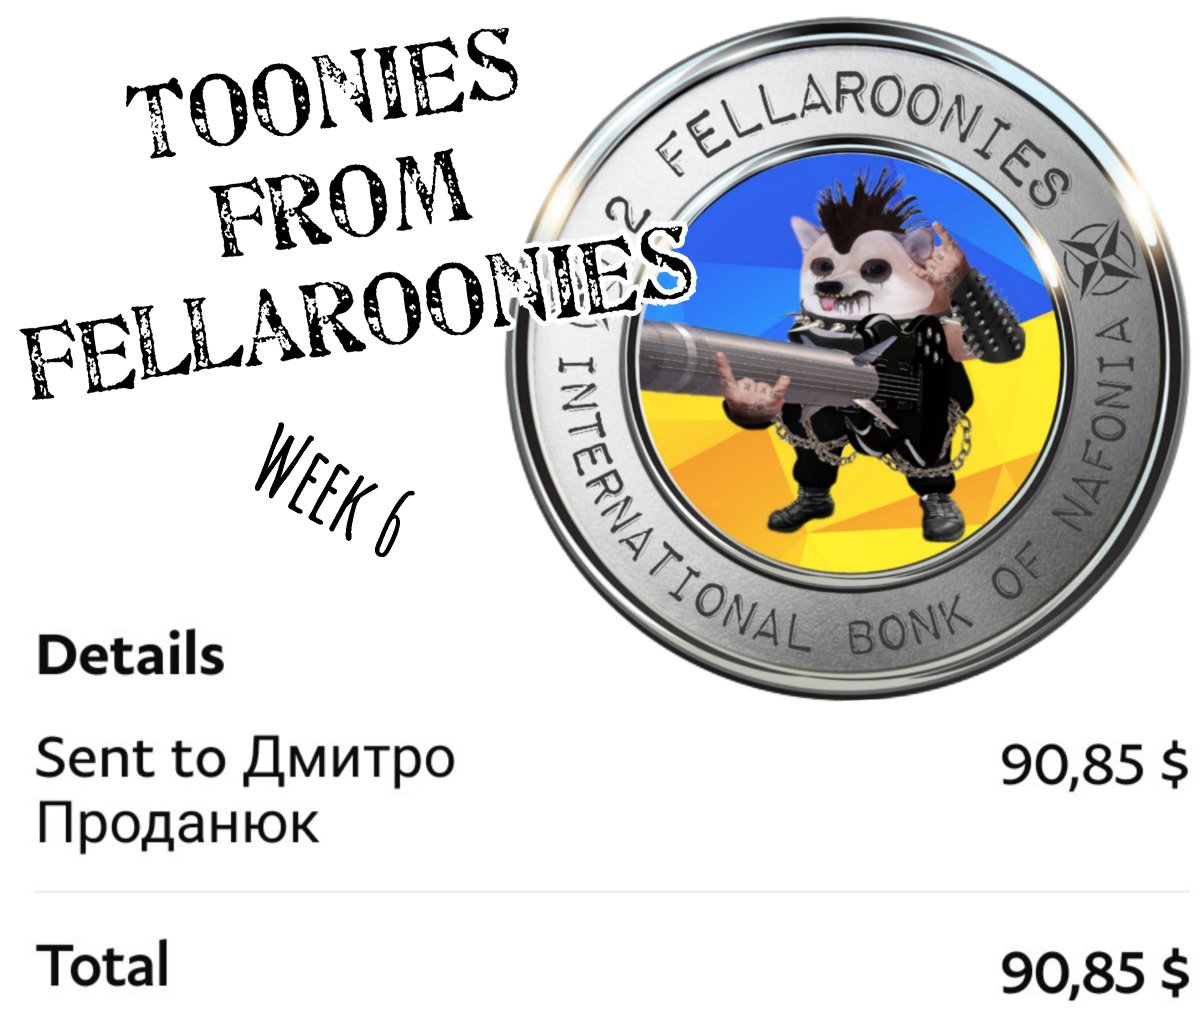 Here's the toonies from fellaroonies for this week!

@Wendehopes, can you fix:
•2 tickets for @rrodemann2
•1 ticket for @Birdfella_Esq
•3 tickets for @Bencla_love_cat?

#ToonieTuesday #WildHornets